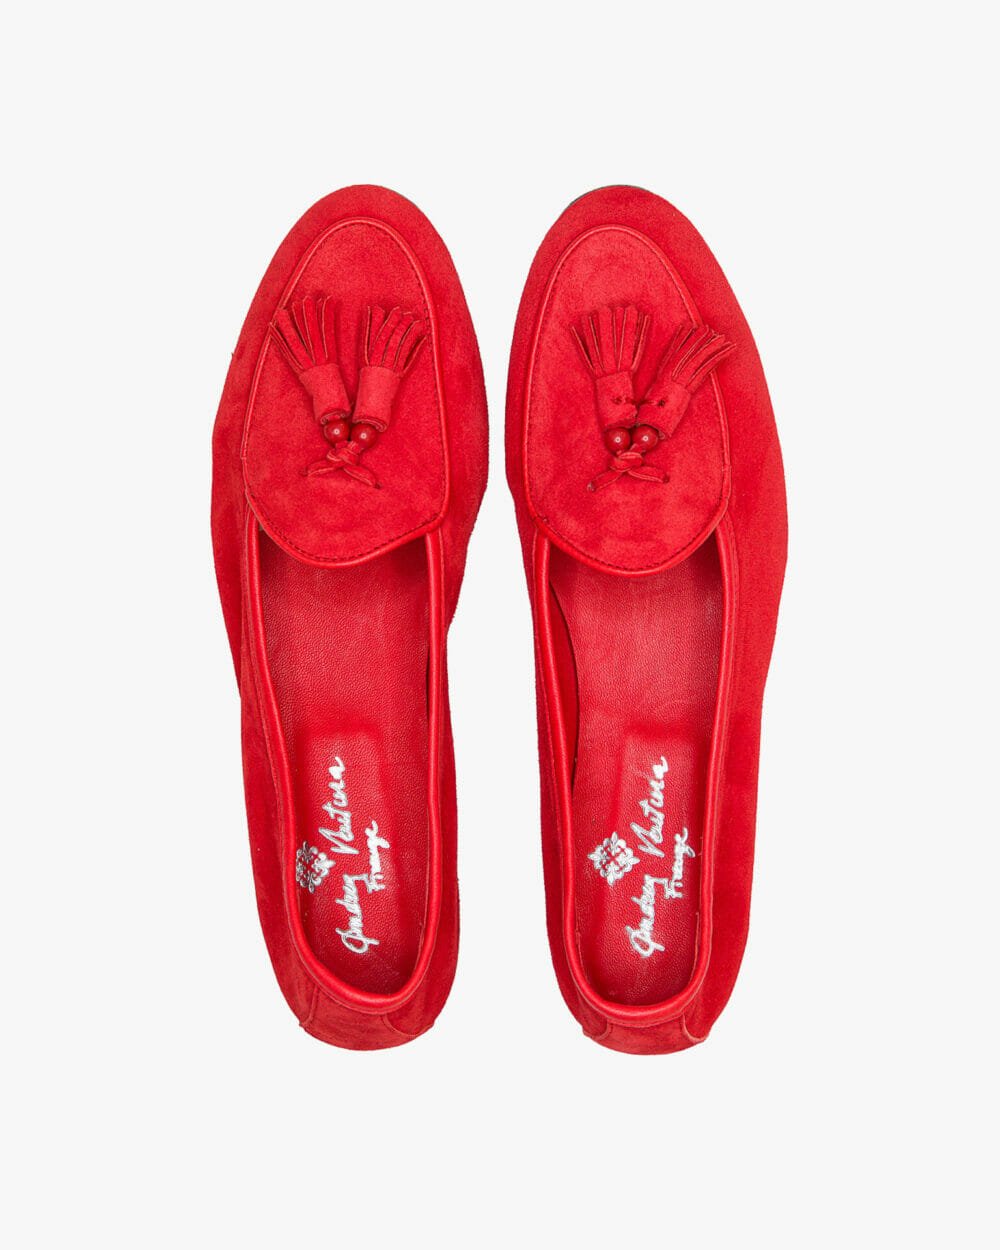 Belgian-d-np-cr-Kubrick-red-suede-from-above